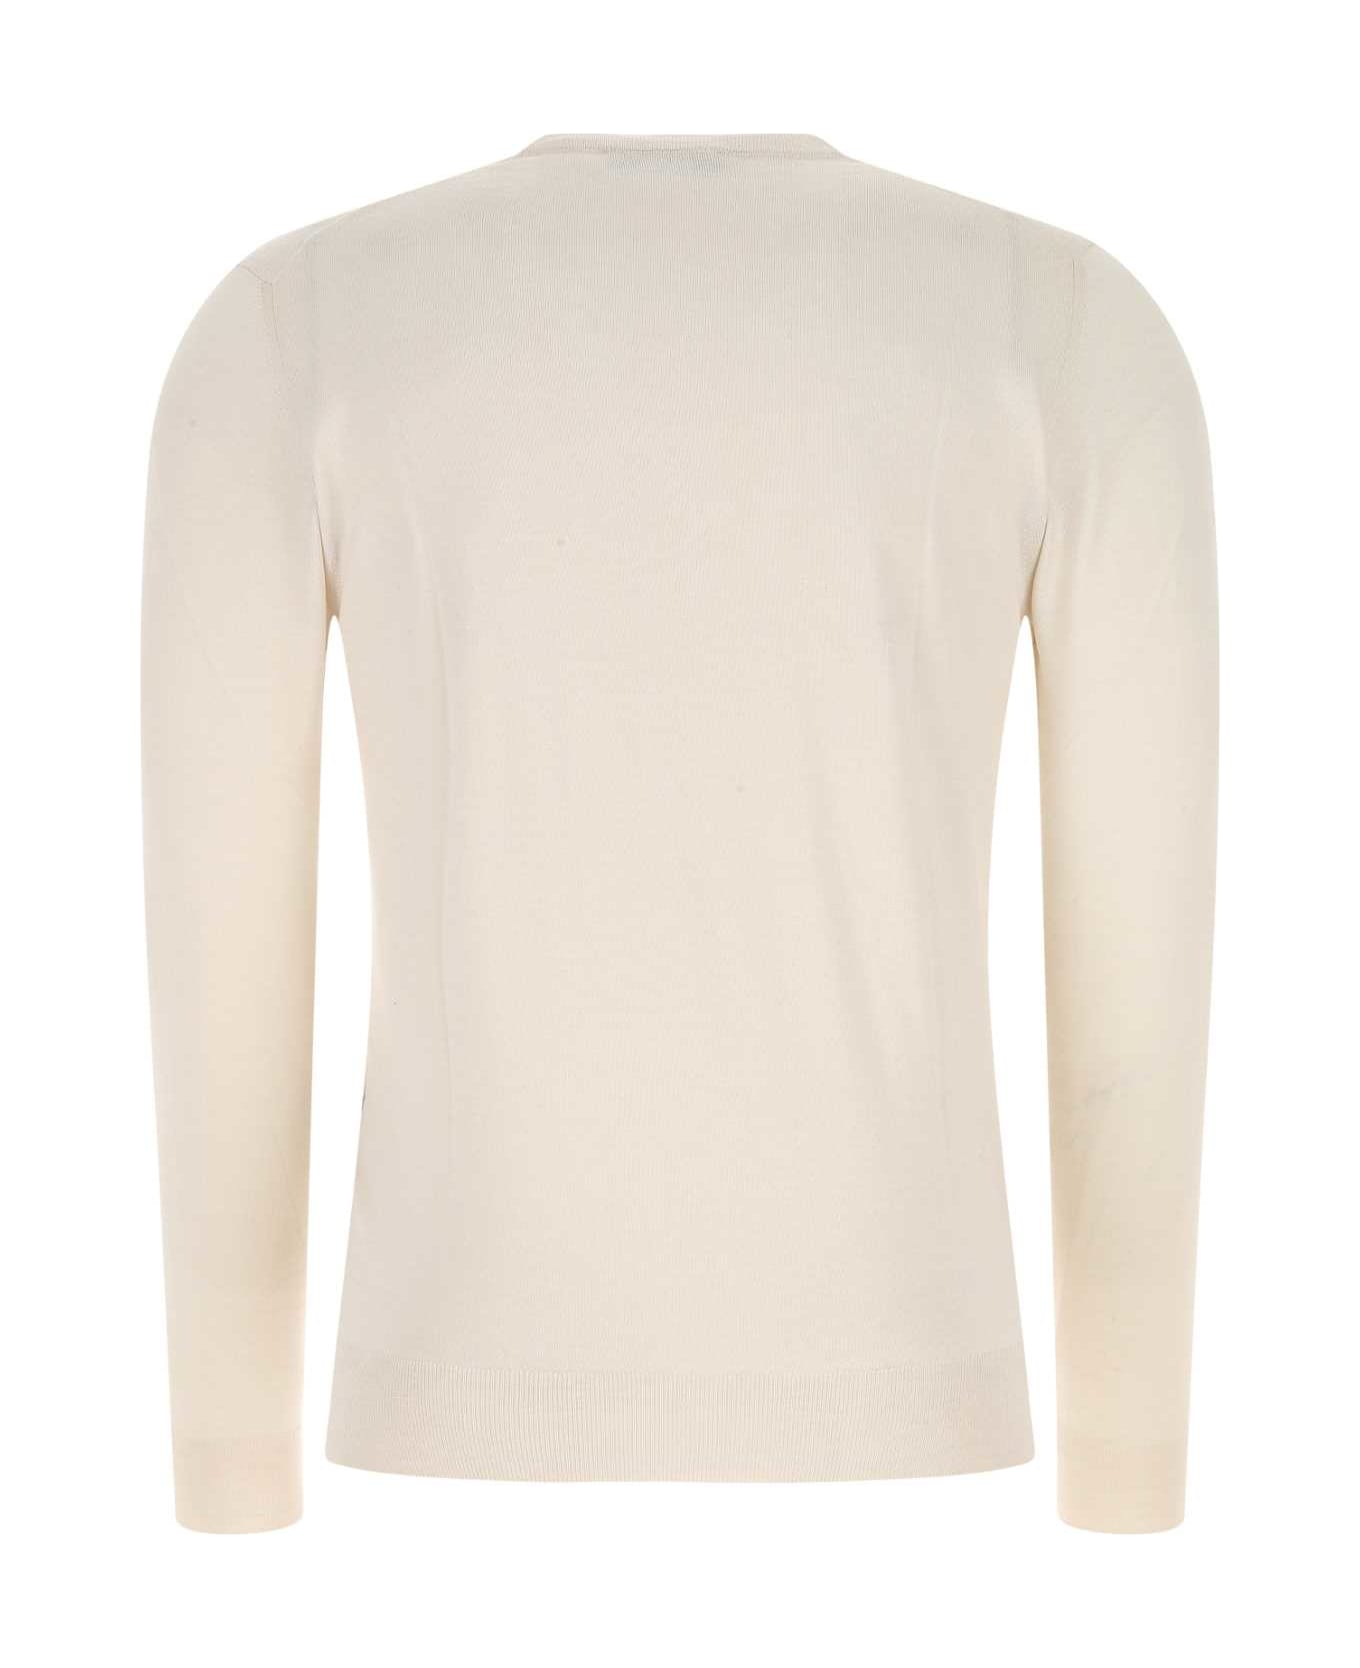 Fedeli Ivory Cashmere Blend Sweater - 40